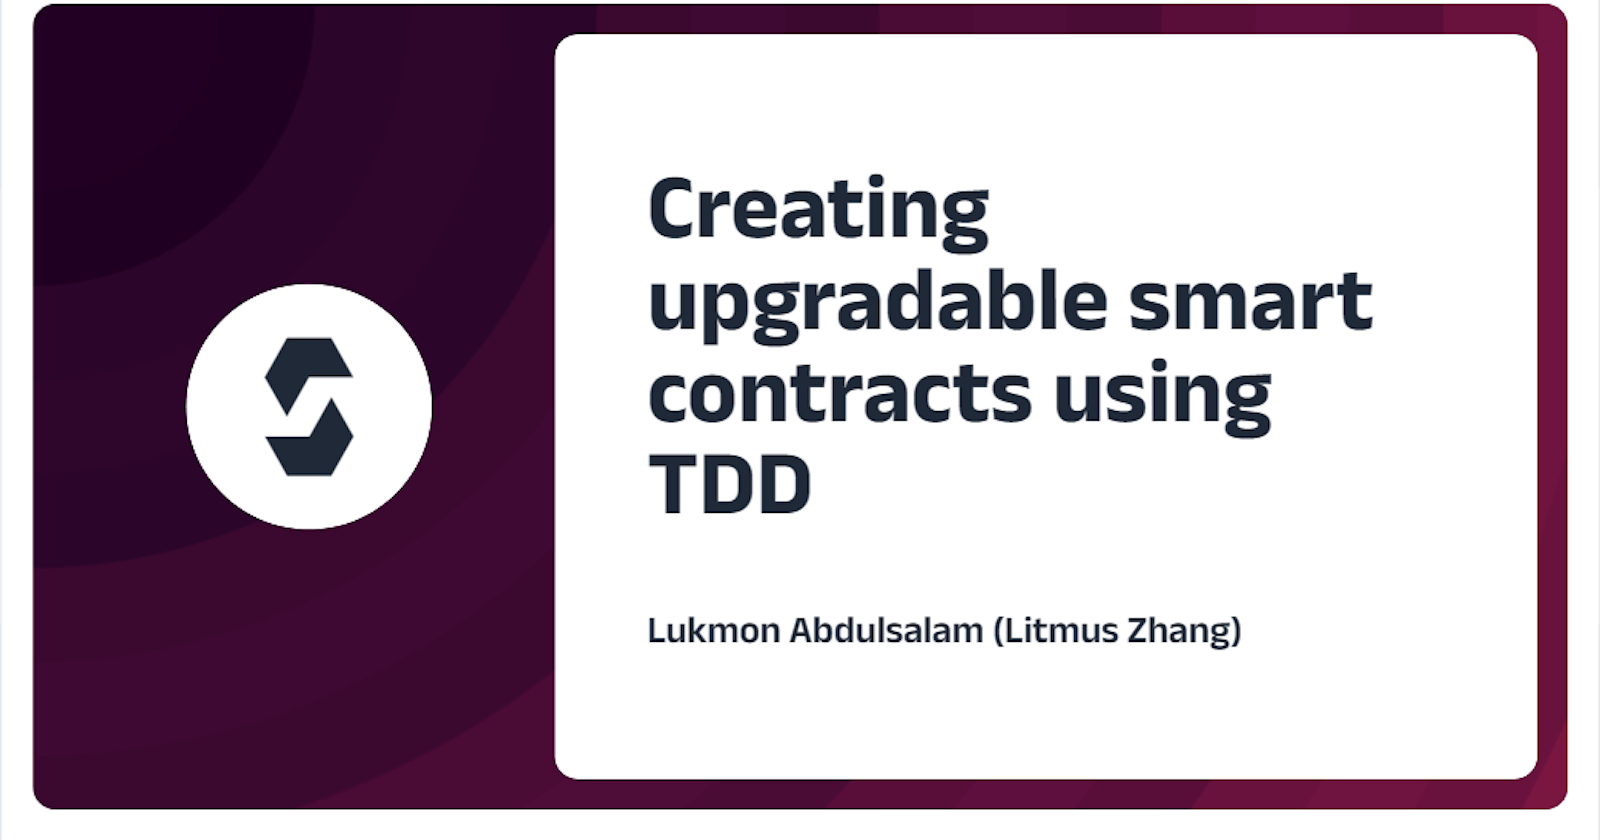 Creating upgradable smart contracts using TDD